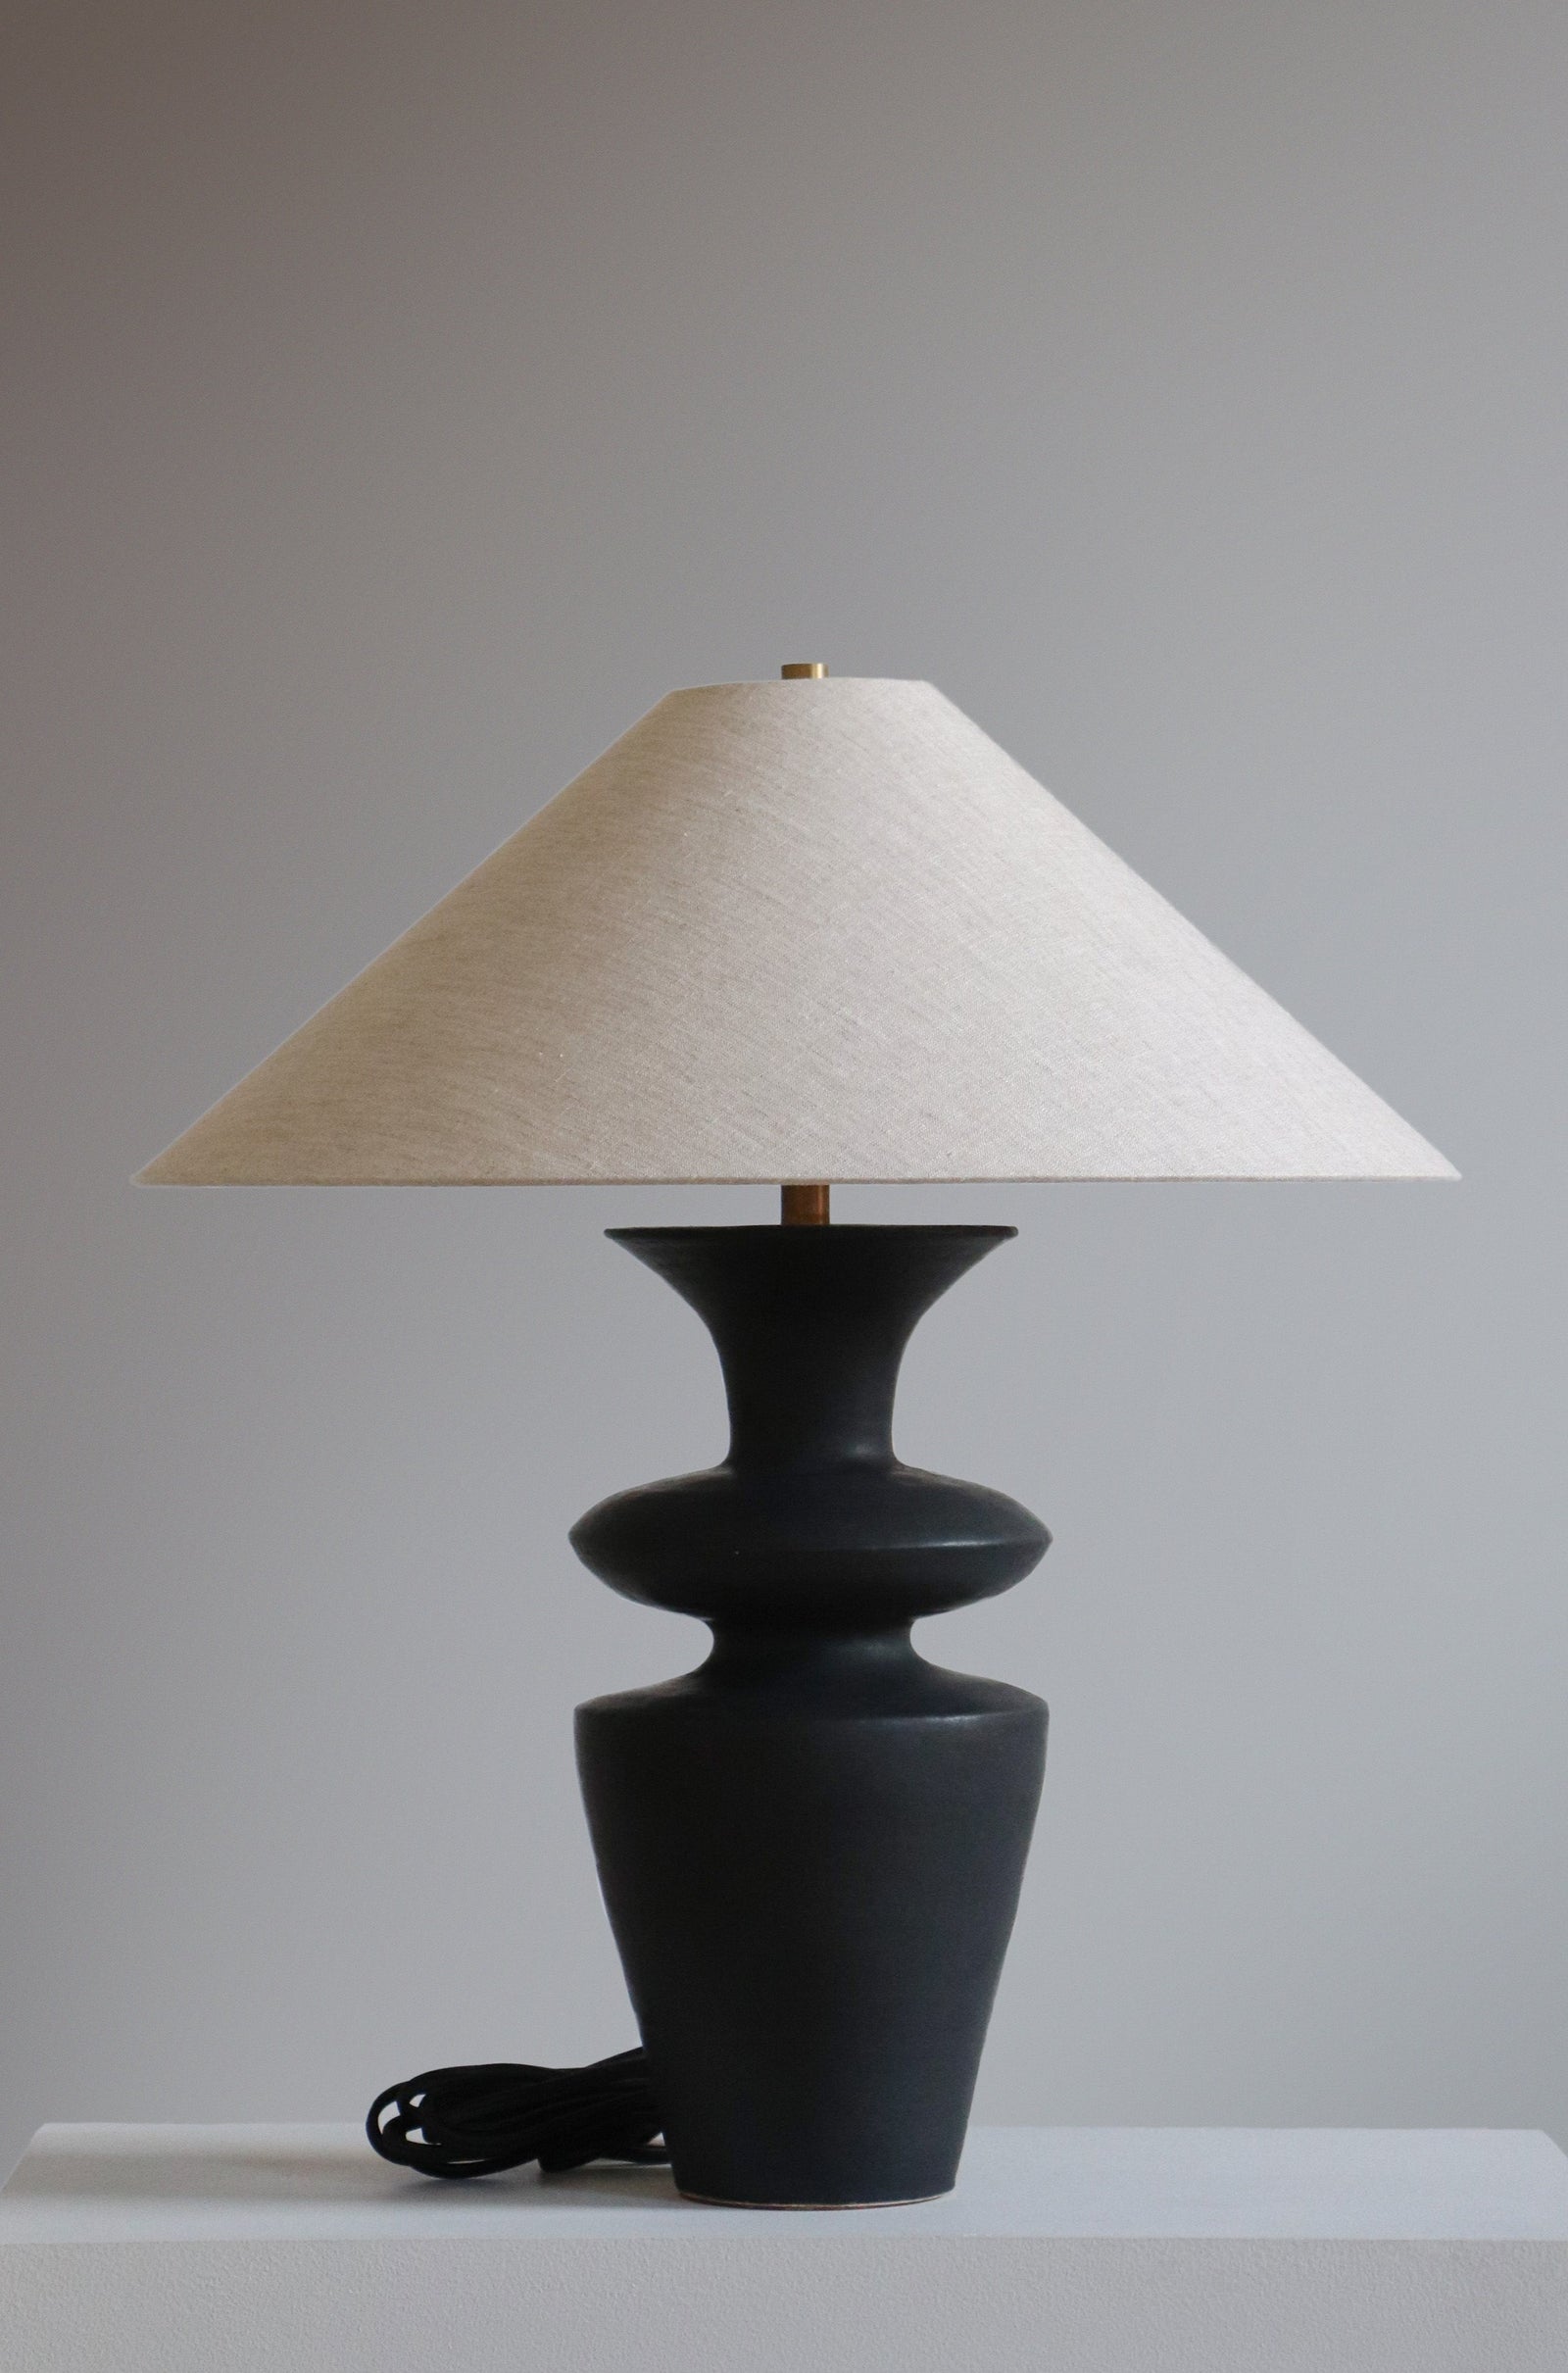 Rhodes lamp in Anthracite finish with oatmeal linen shade